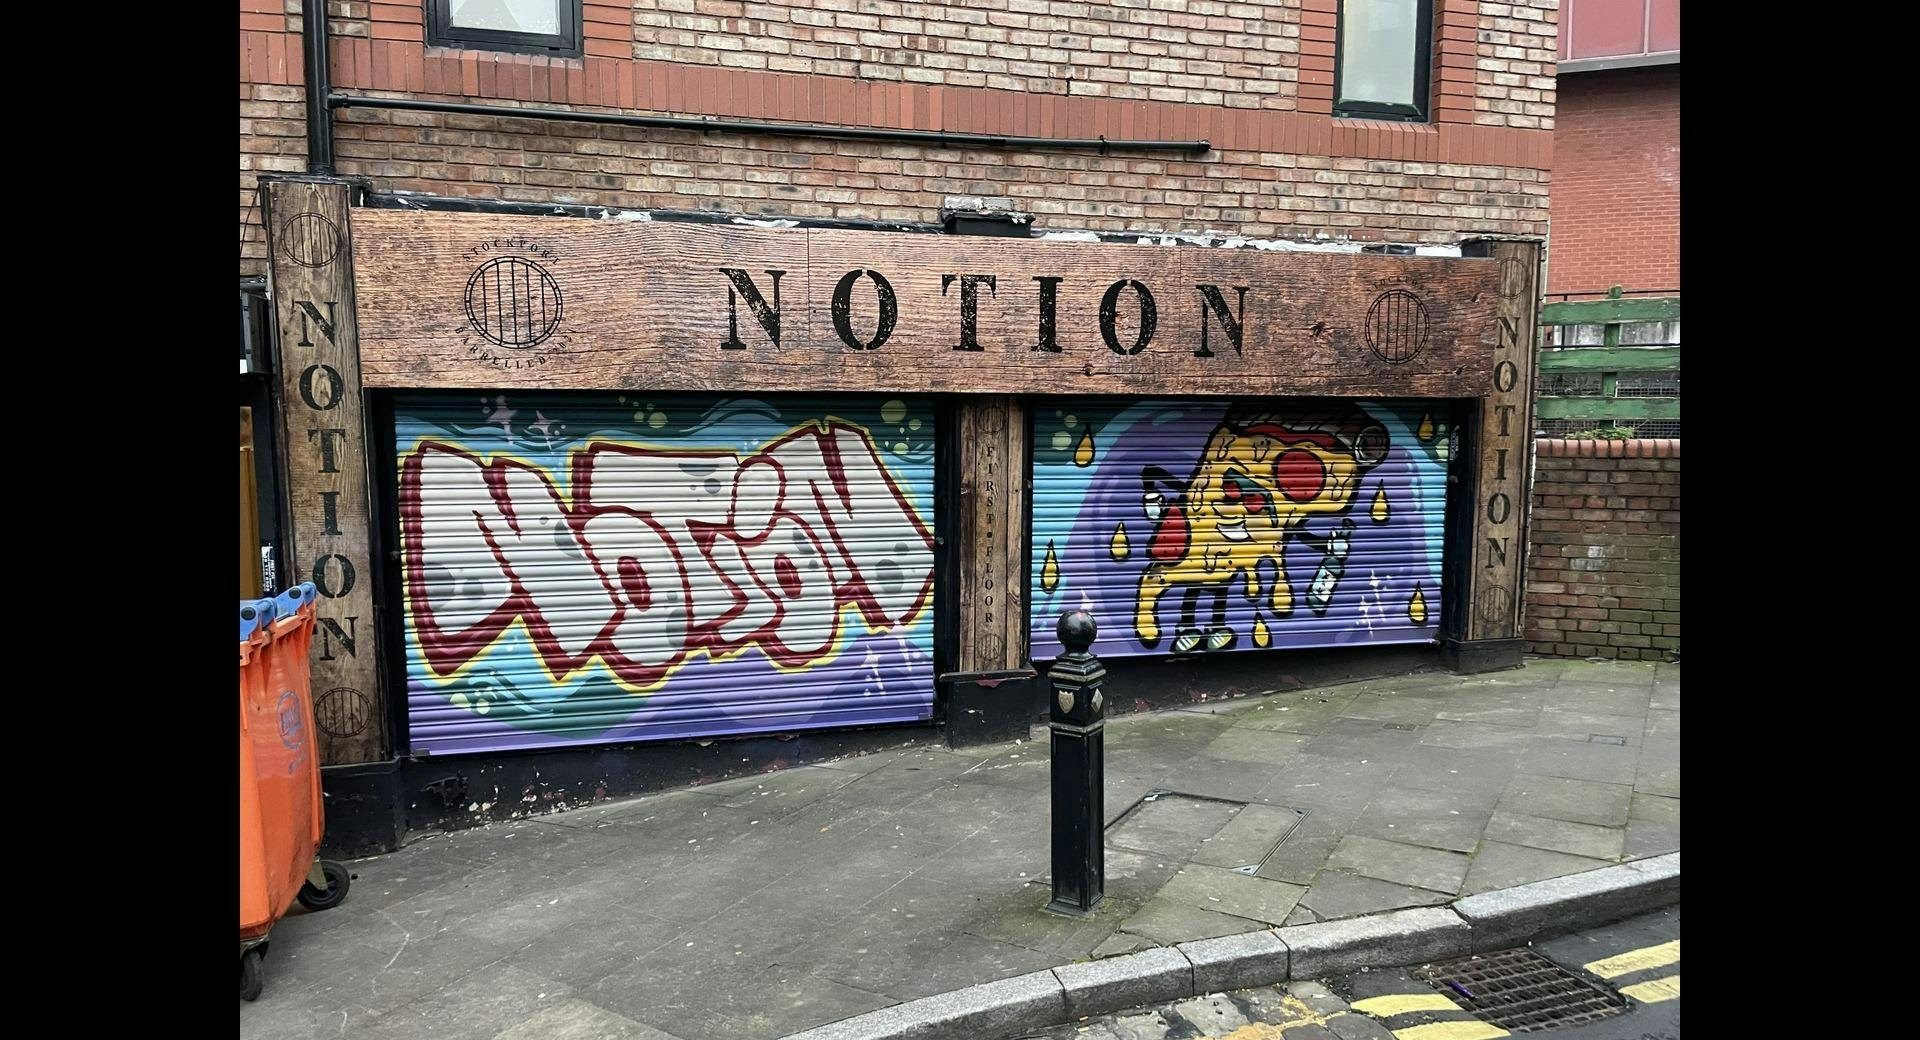 Photo of restaurant Notion in City Centre, Stockport